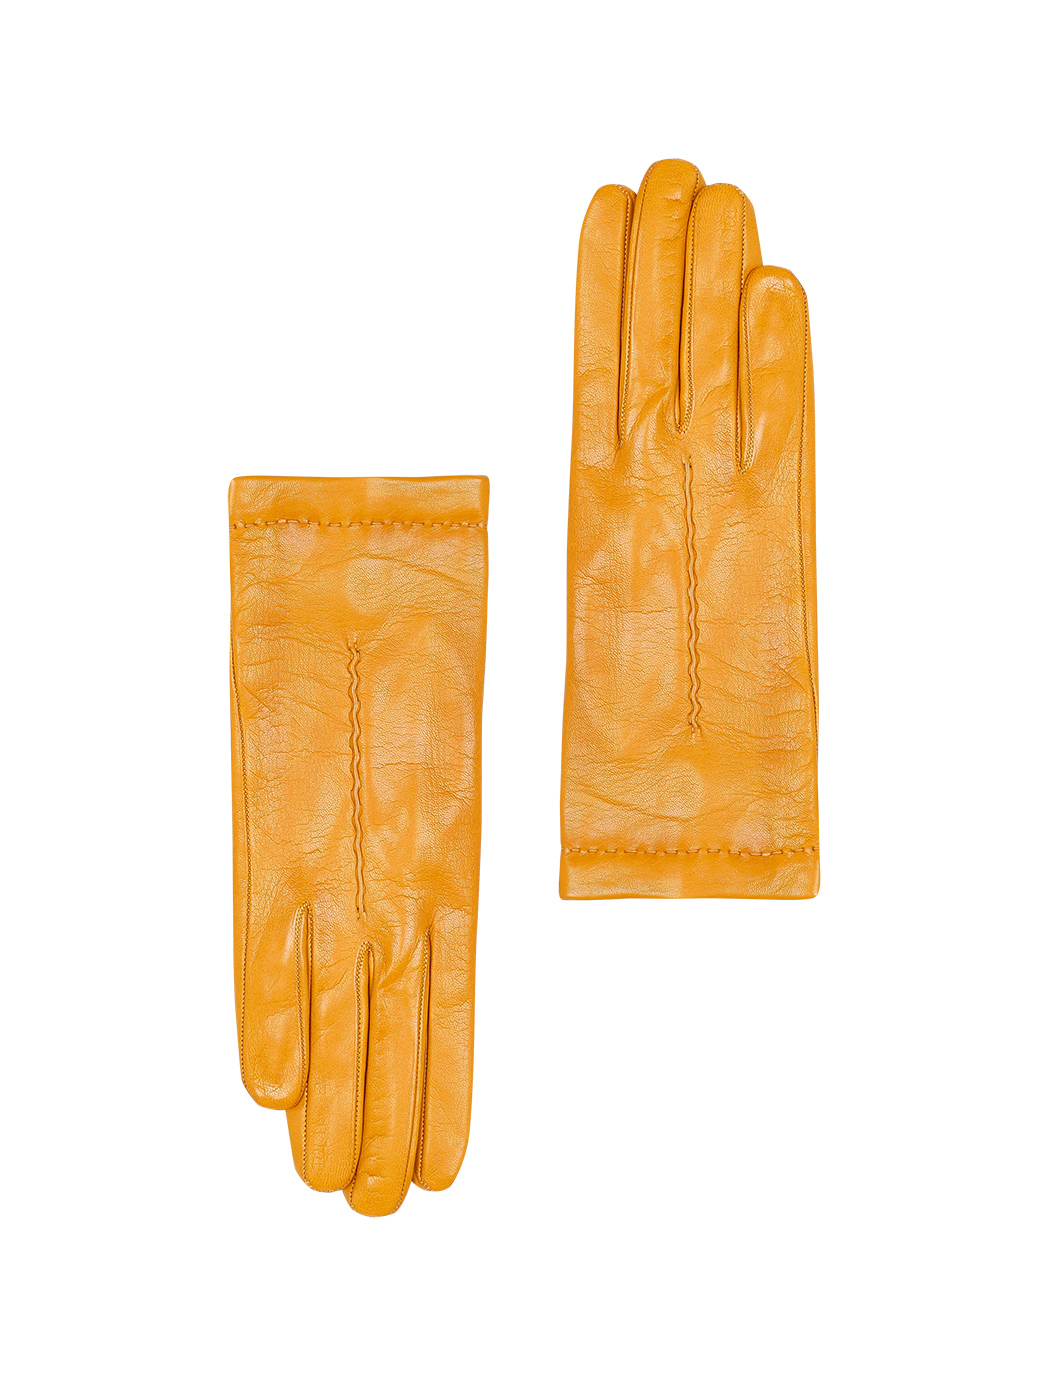 Women's Silk lined Gloves in Yellow Leather